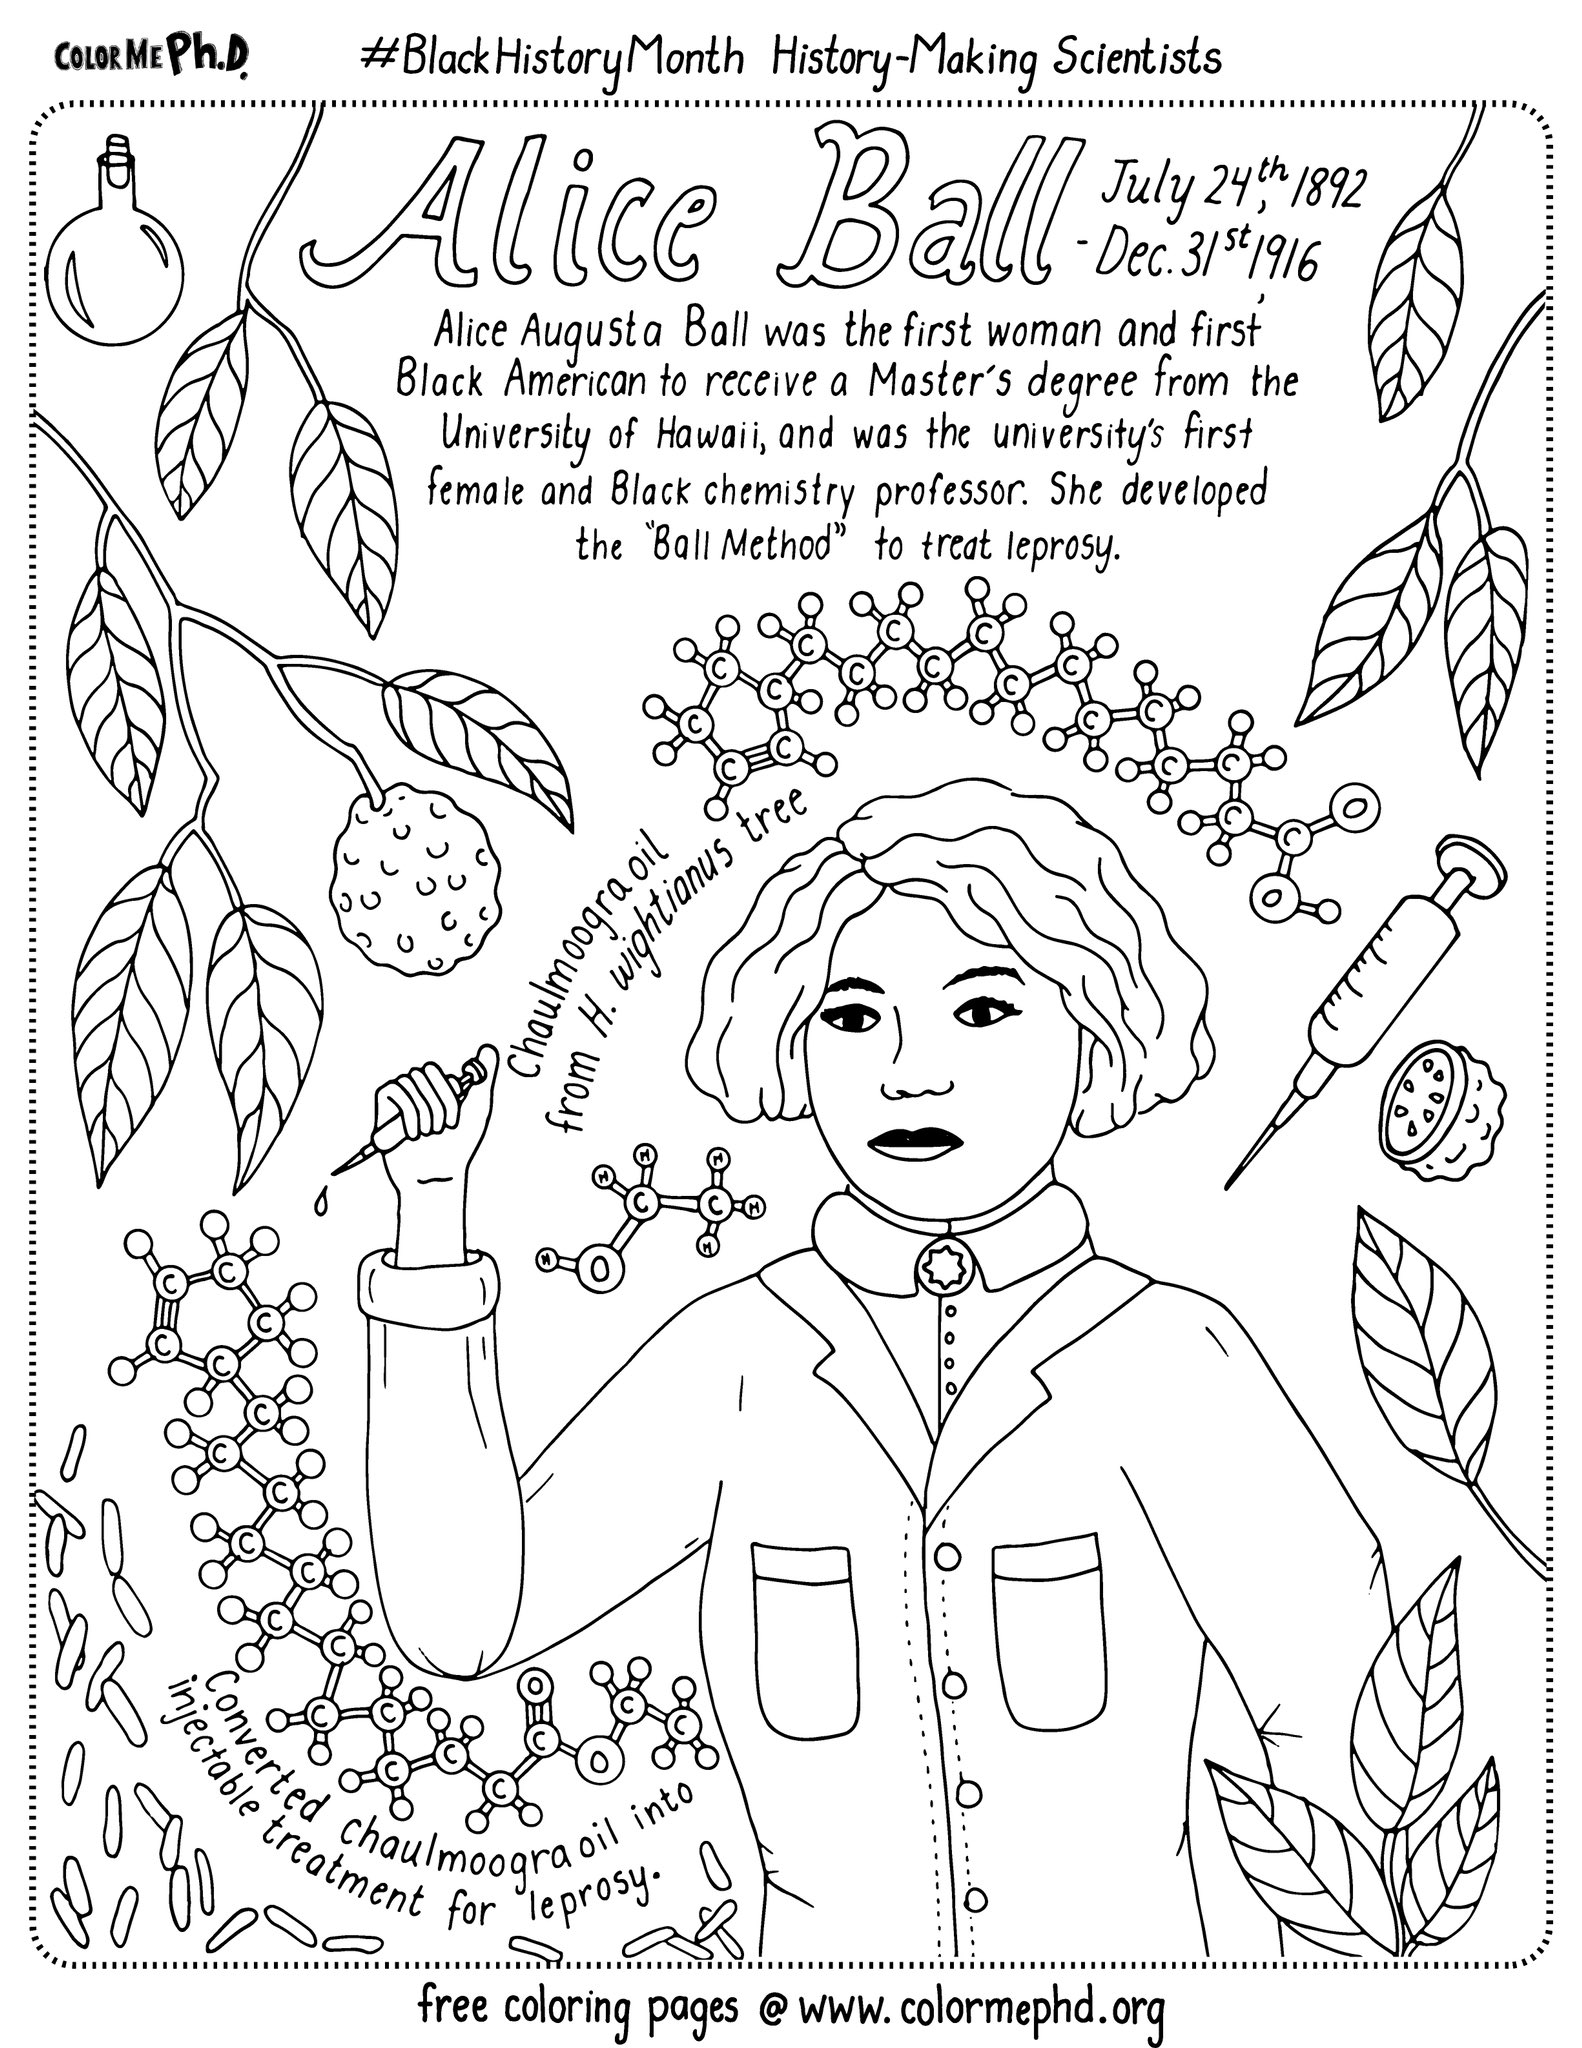 Colormephd on x in honor of blackhistorymonth well be posting new coloring pages featuring black history